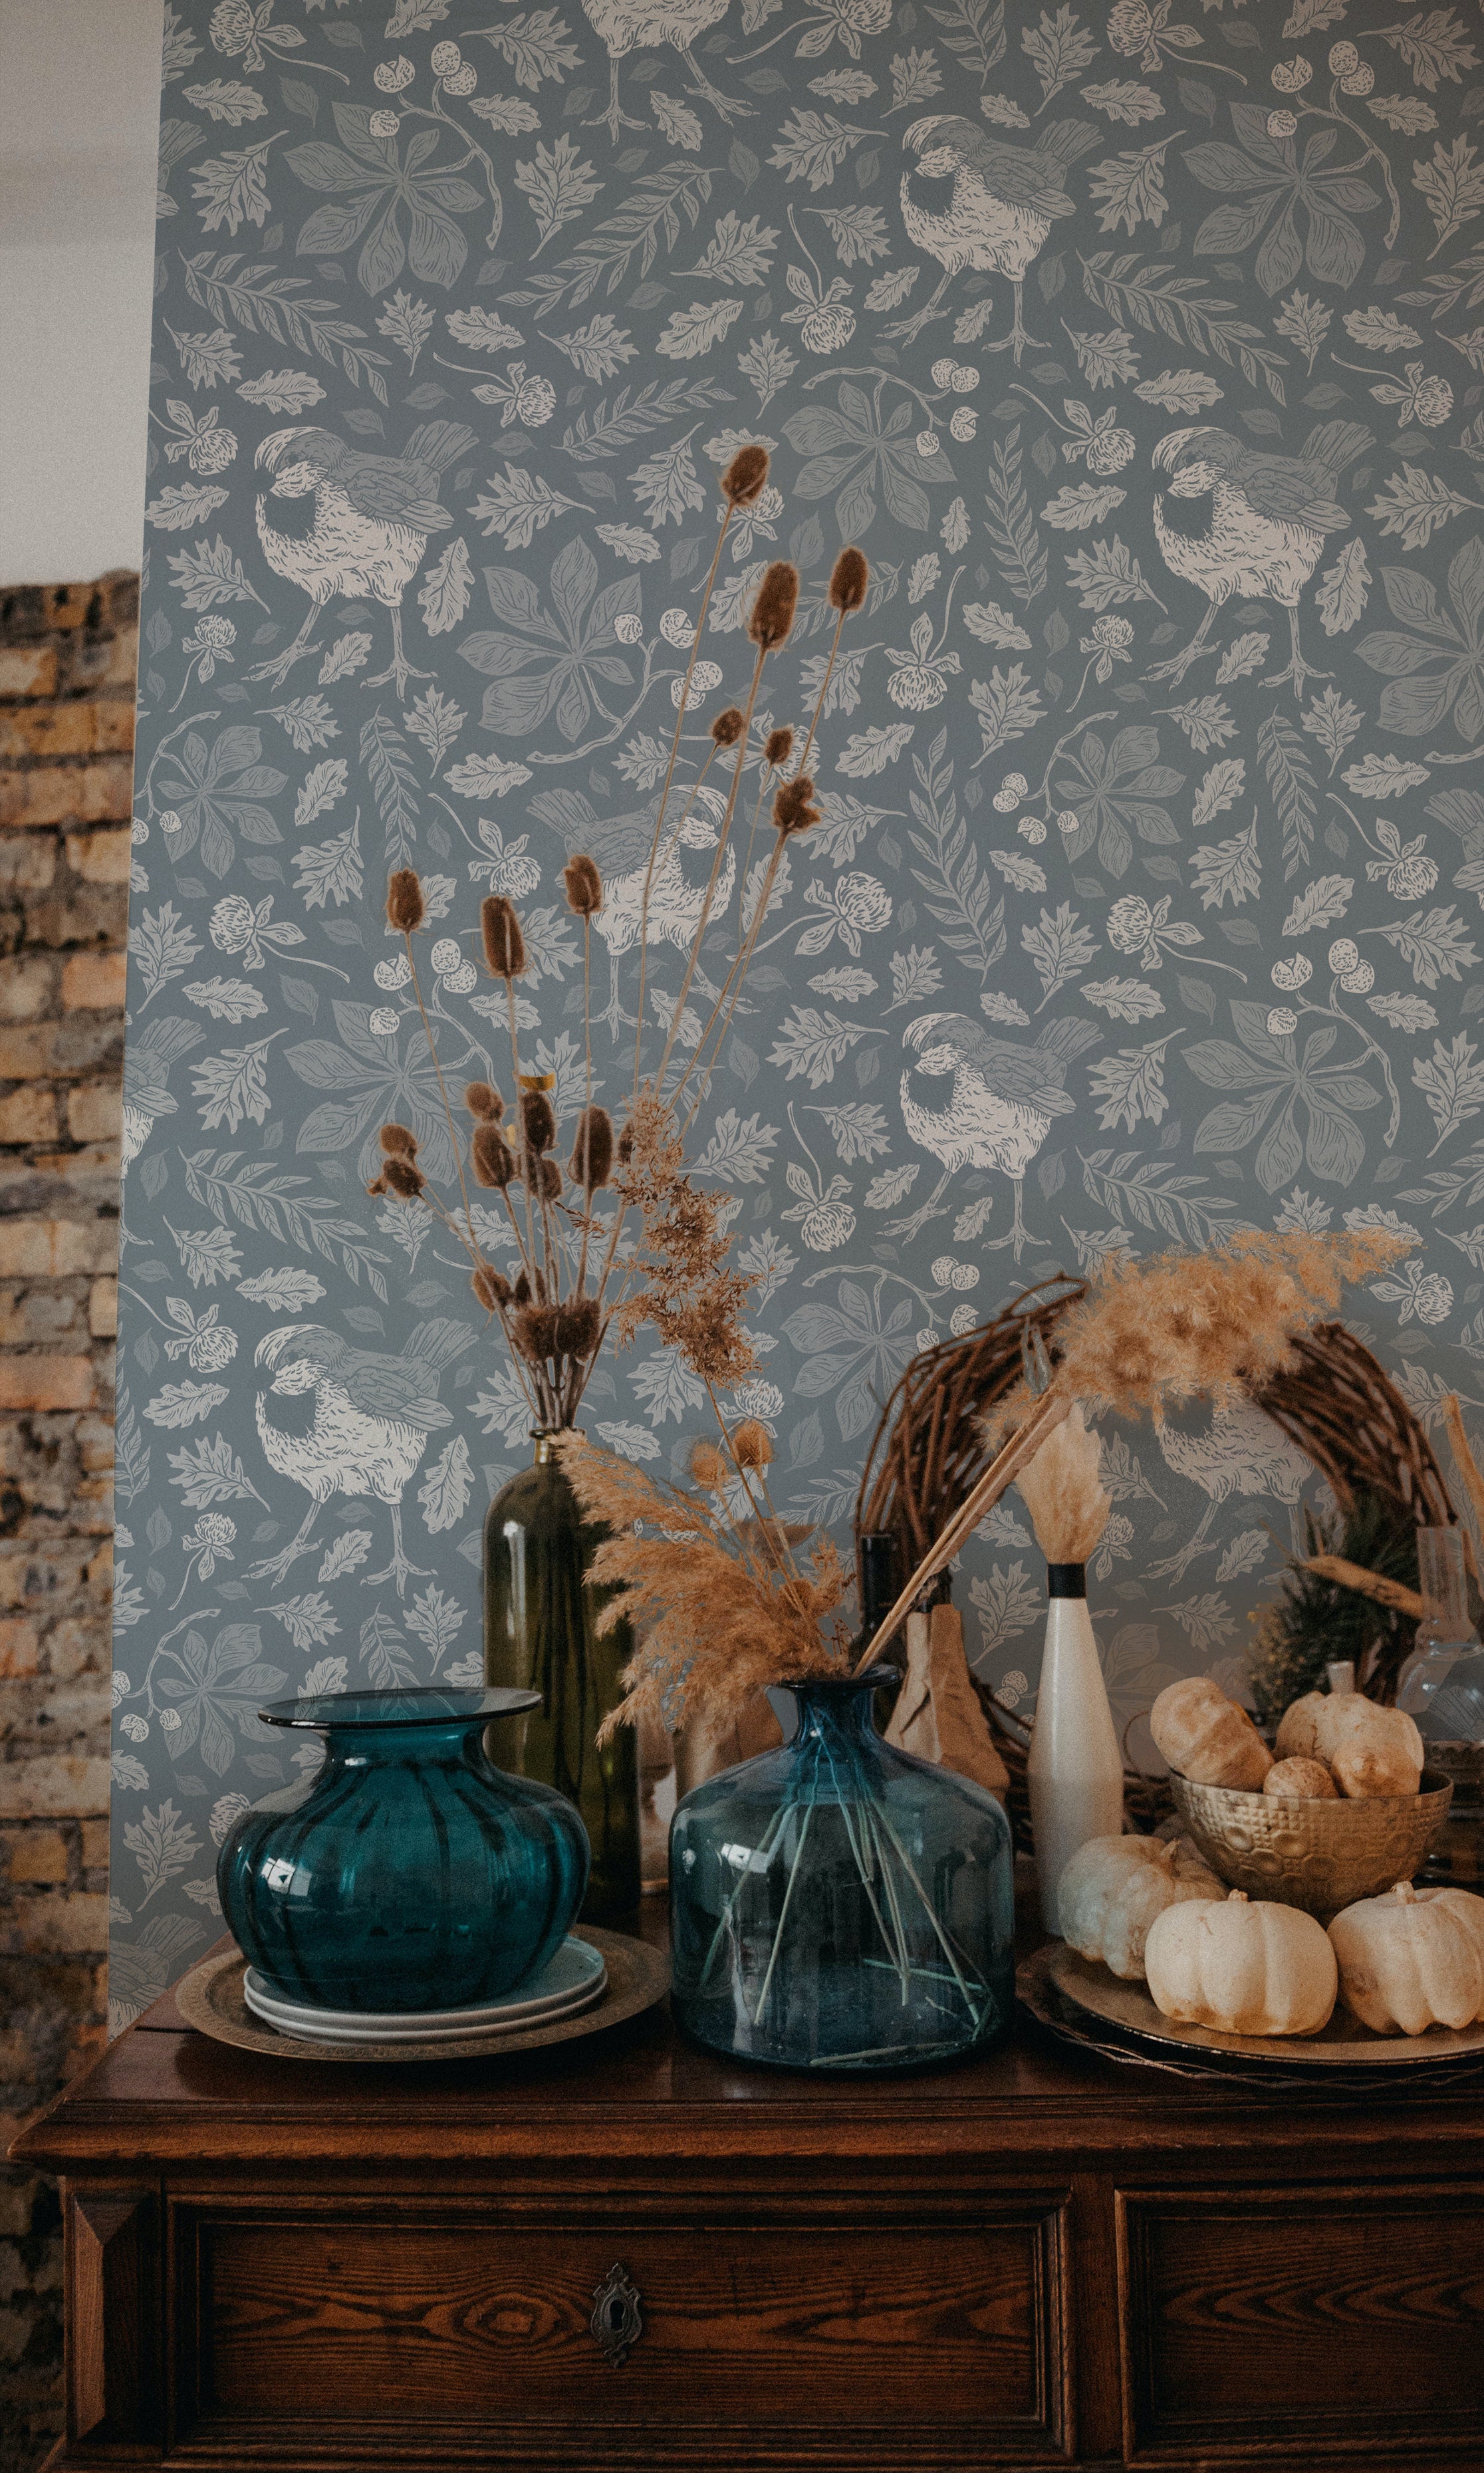 A rustic interior scene featuring a wall covered with vintage-style sparrow wallpaper in a cool grey color. The wallpaper is illustrated with white sparrows and delicate foliage. In the foreground, a dark wooden sideboard displays blue glass vases, dried flowers, and white pumpkins.